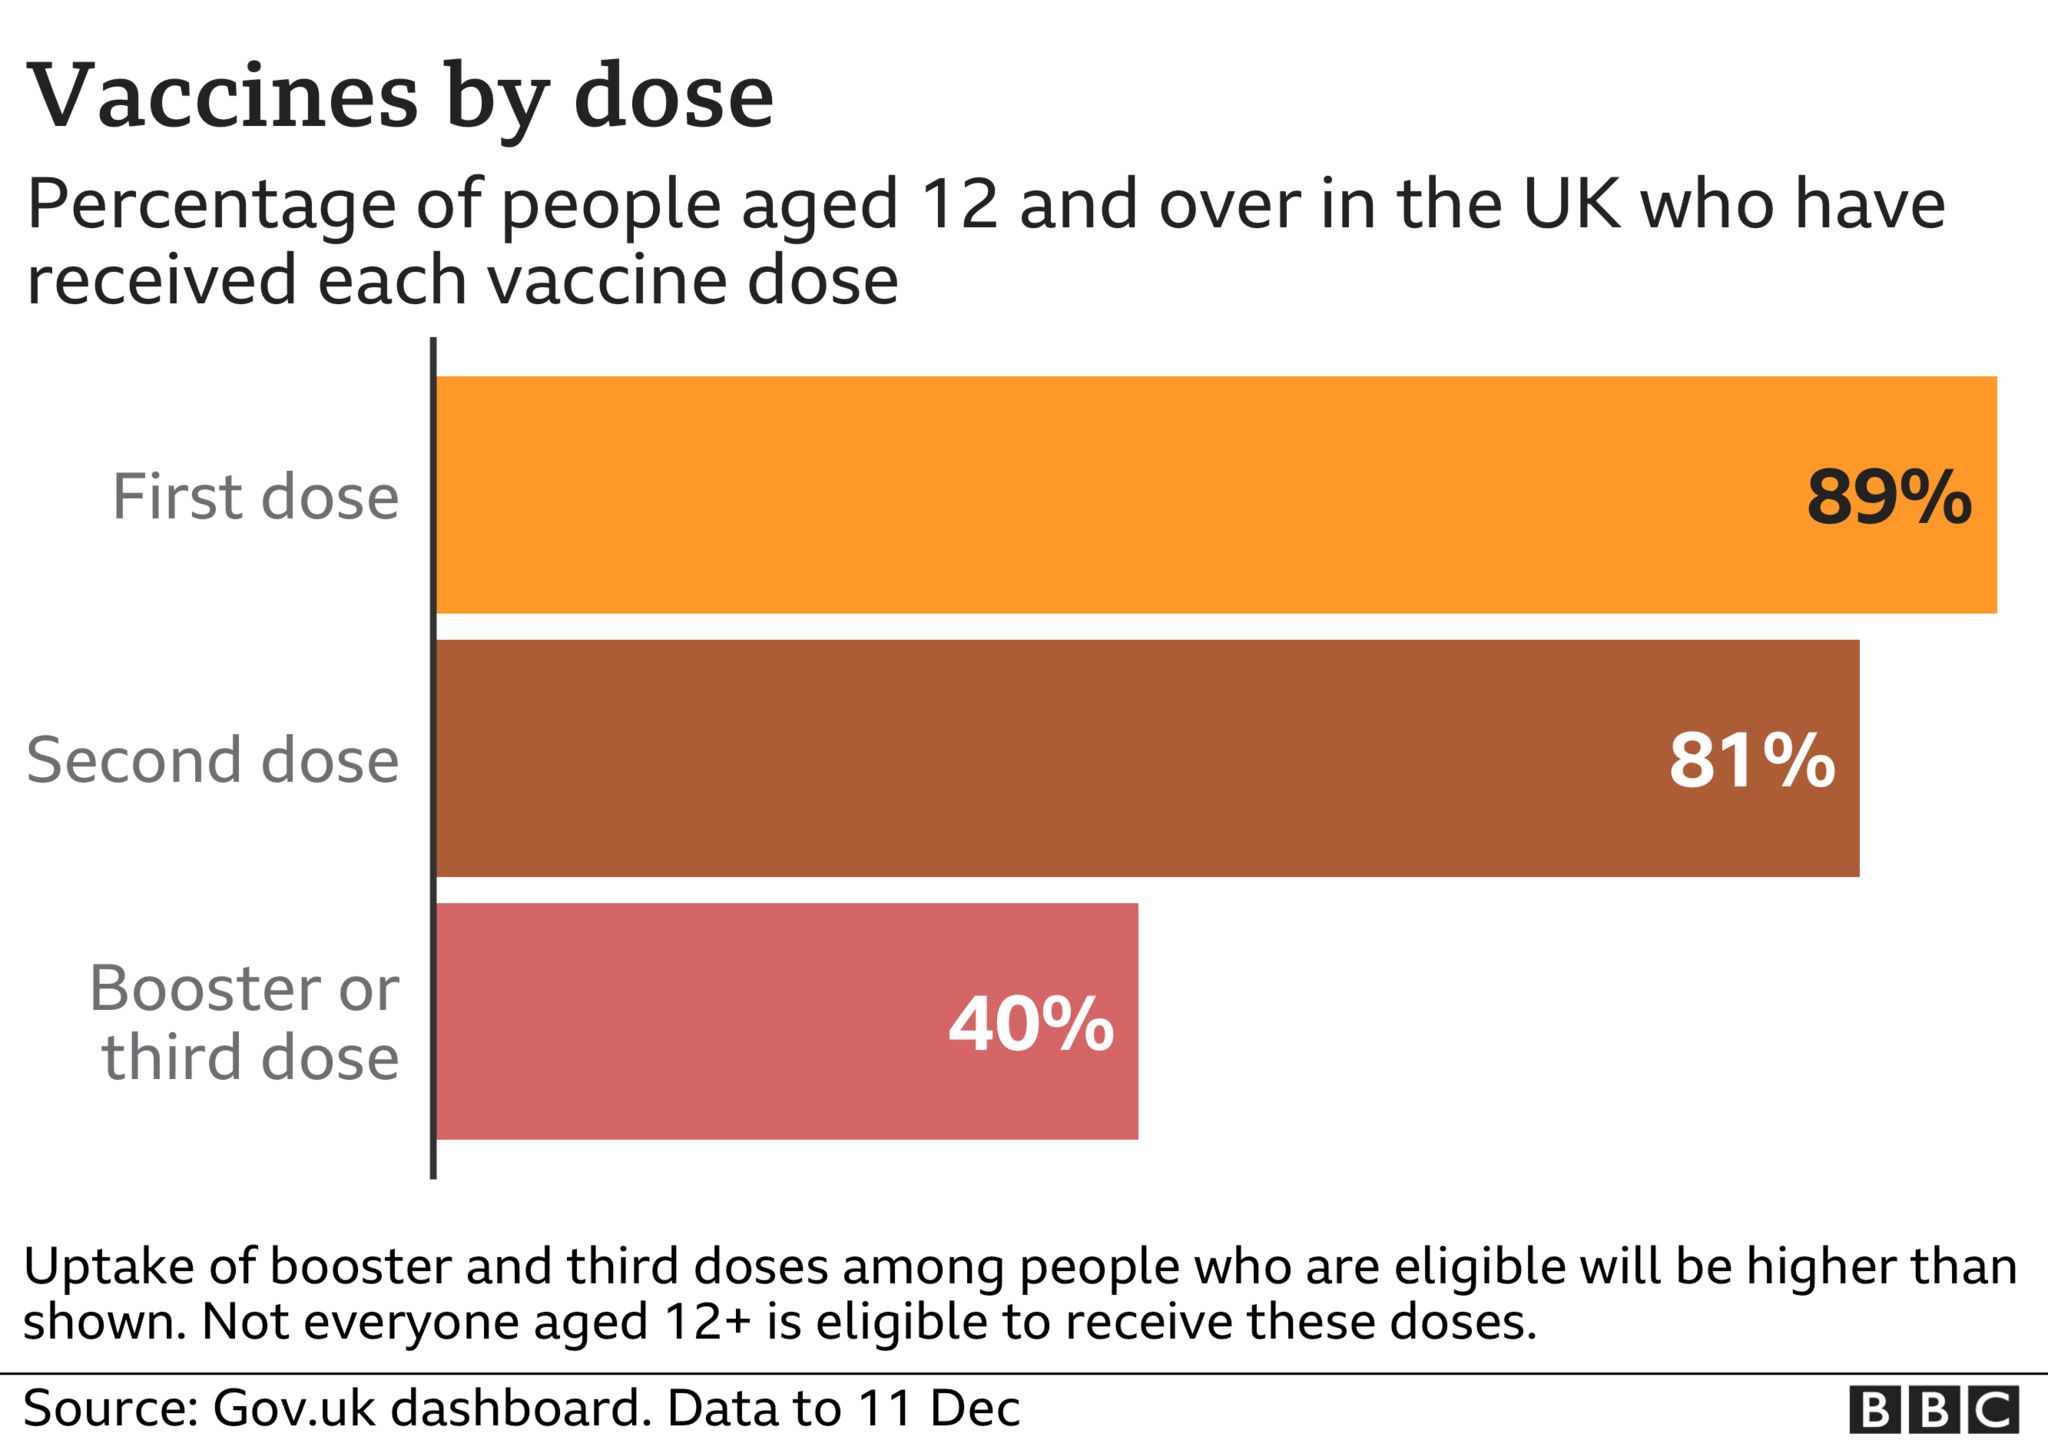 Chart showing the percentage of people who have had different vaccine doses: 89% have had a first dose, 81% have had a second dose, 40% have had a booster or third dose